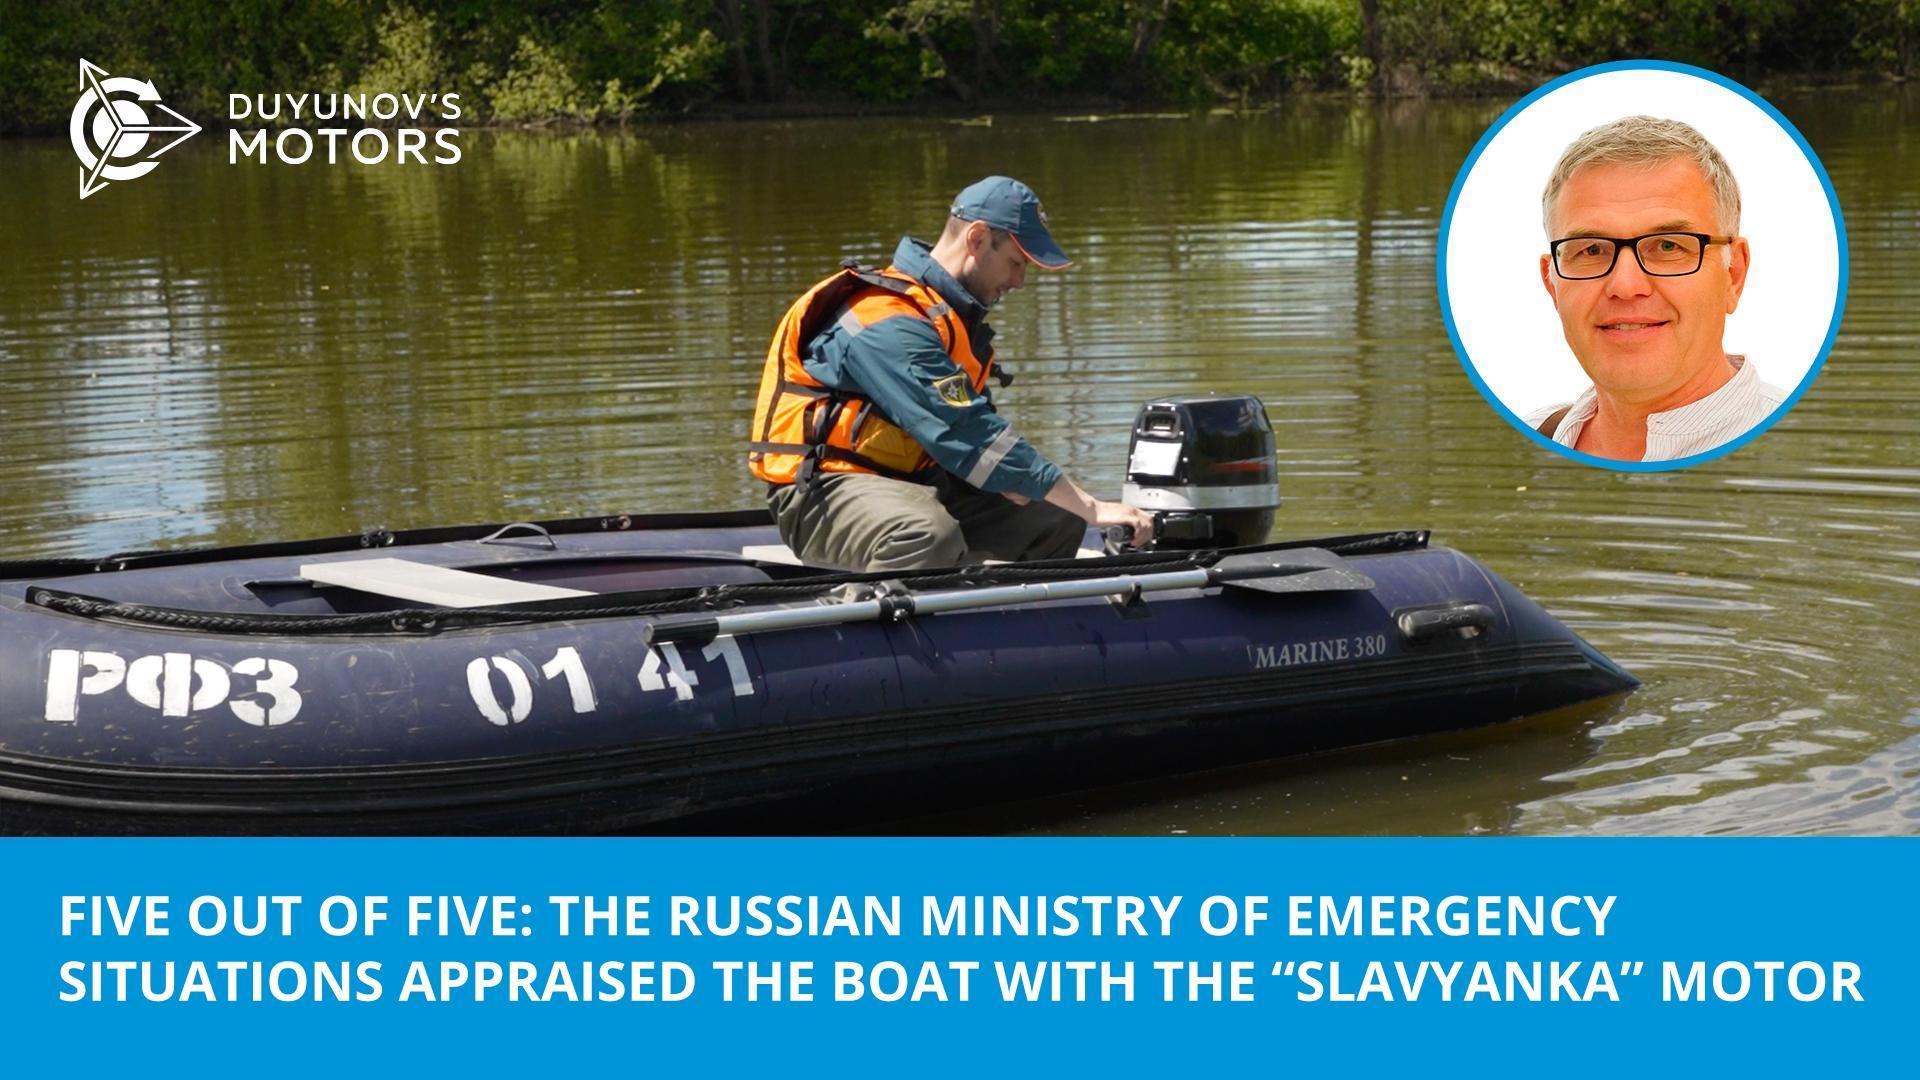 "Five out of five": the Russian Ministry of Emergency Situations appraised the boat with the "Slavyanka" motor